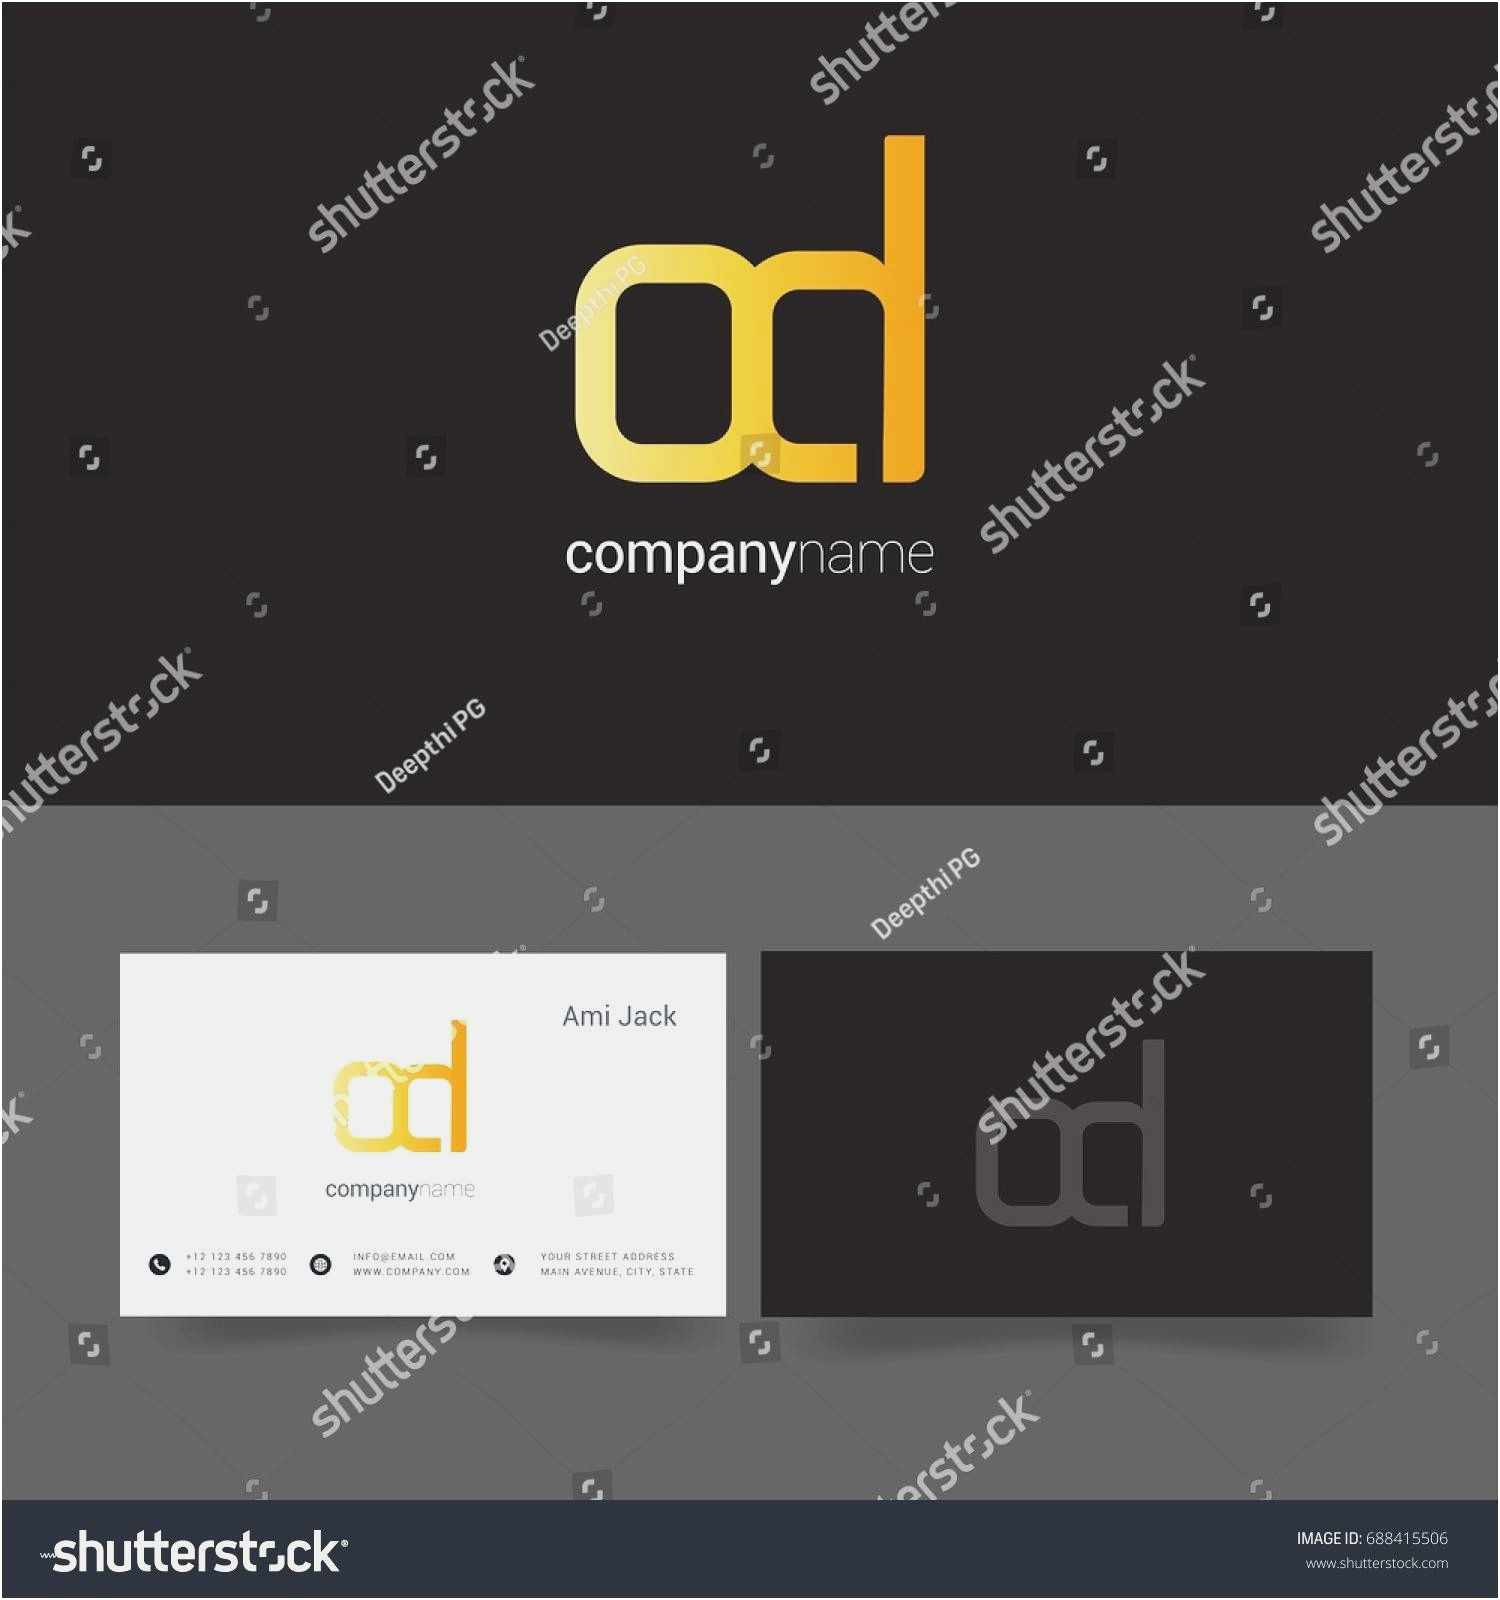 Download 53 Business Card Free Template Professional Of Create Your Own Business Cards Free Templates